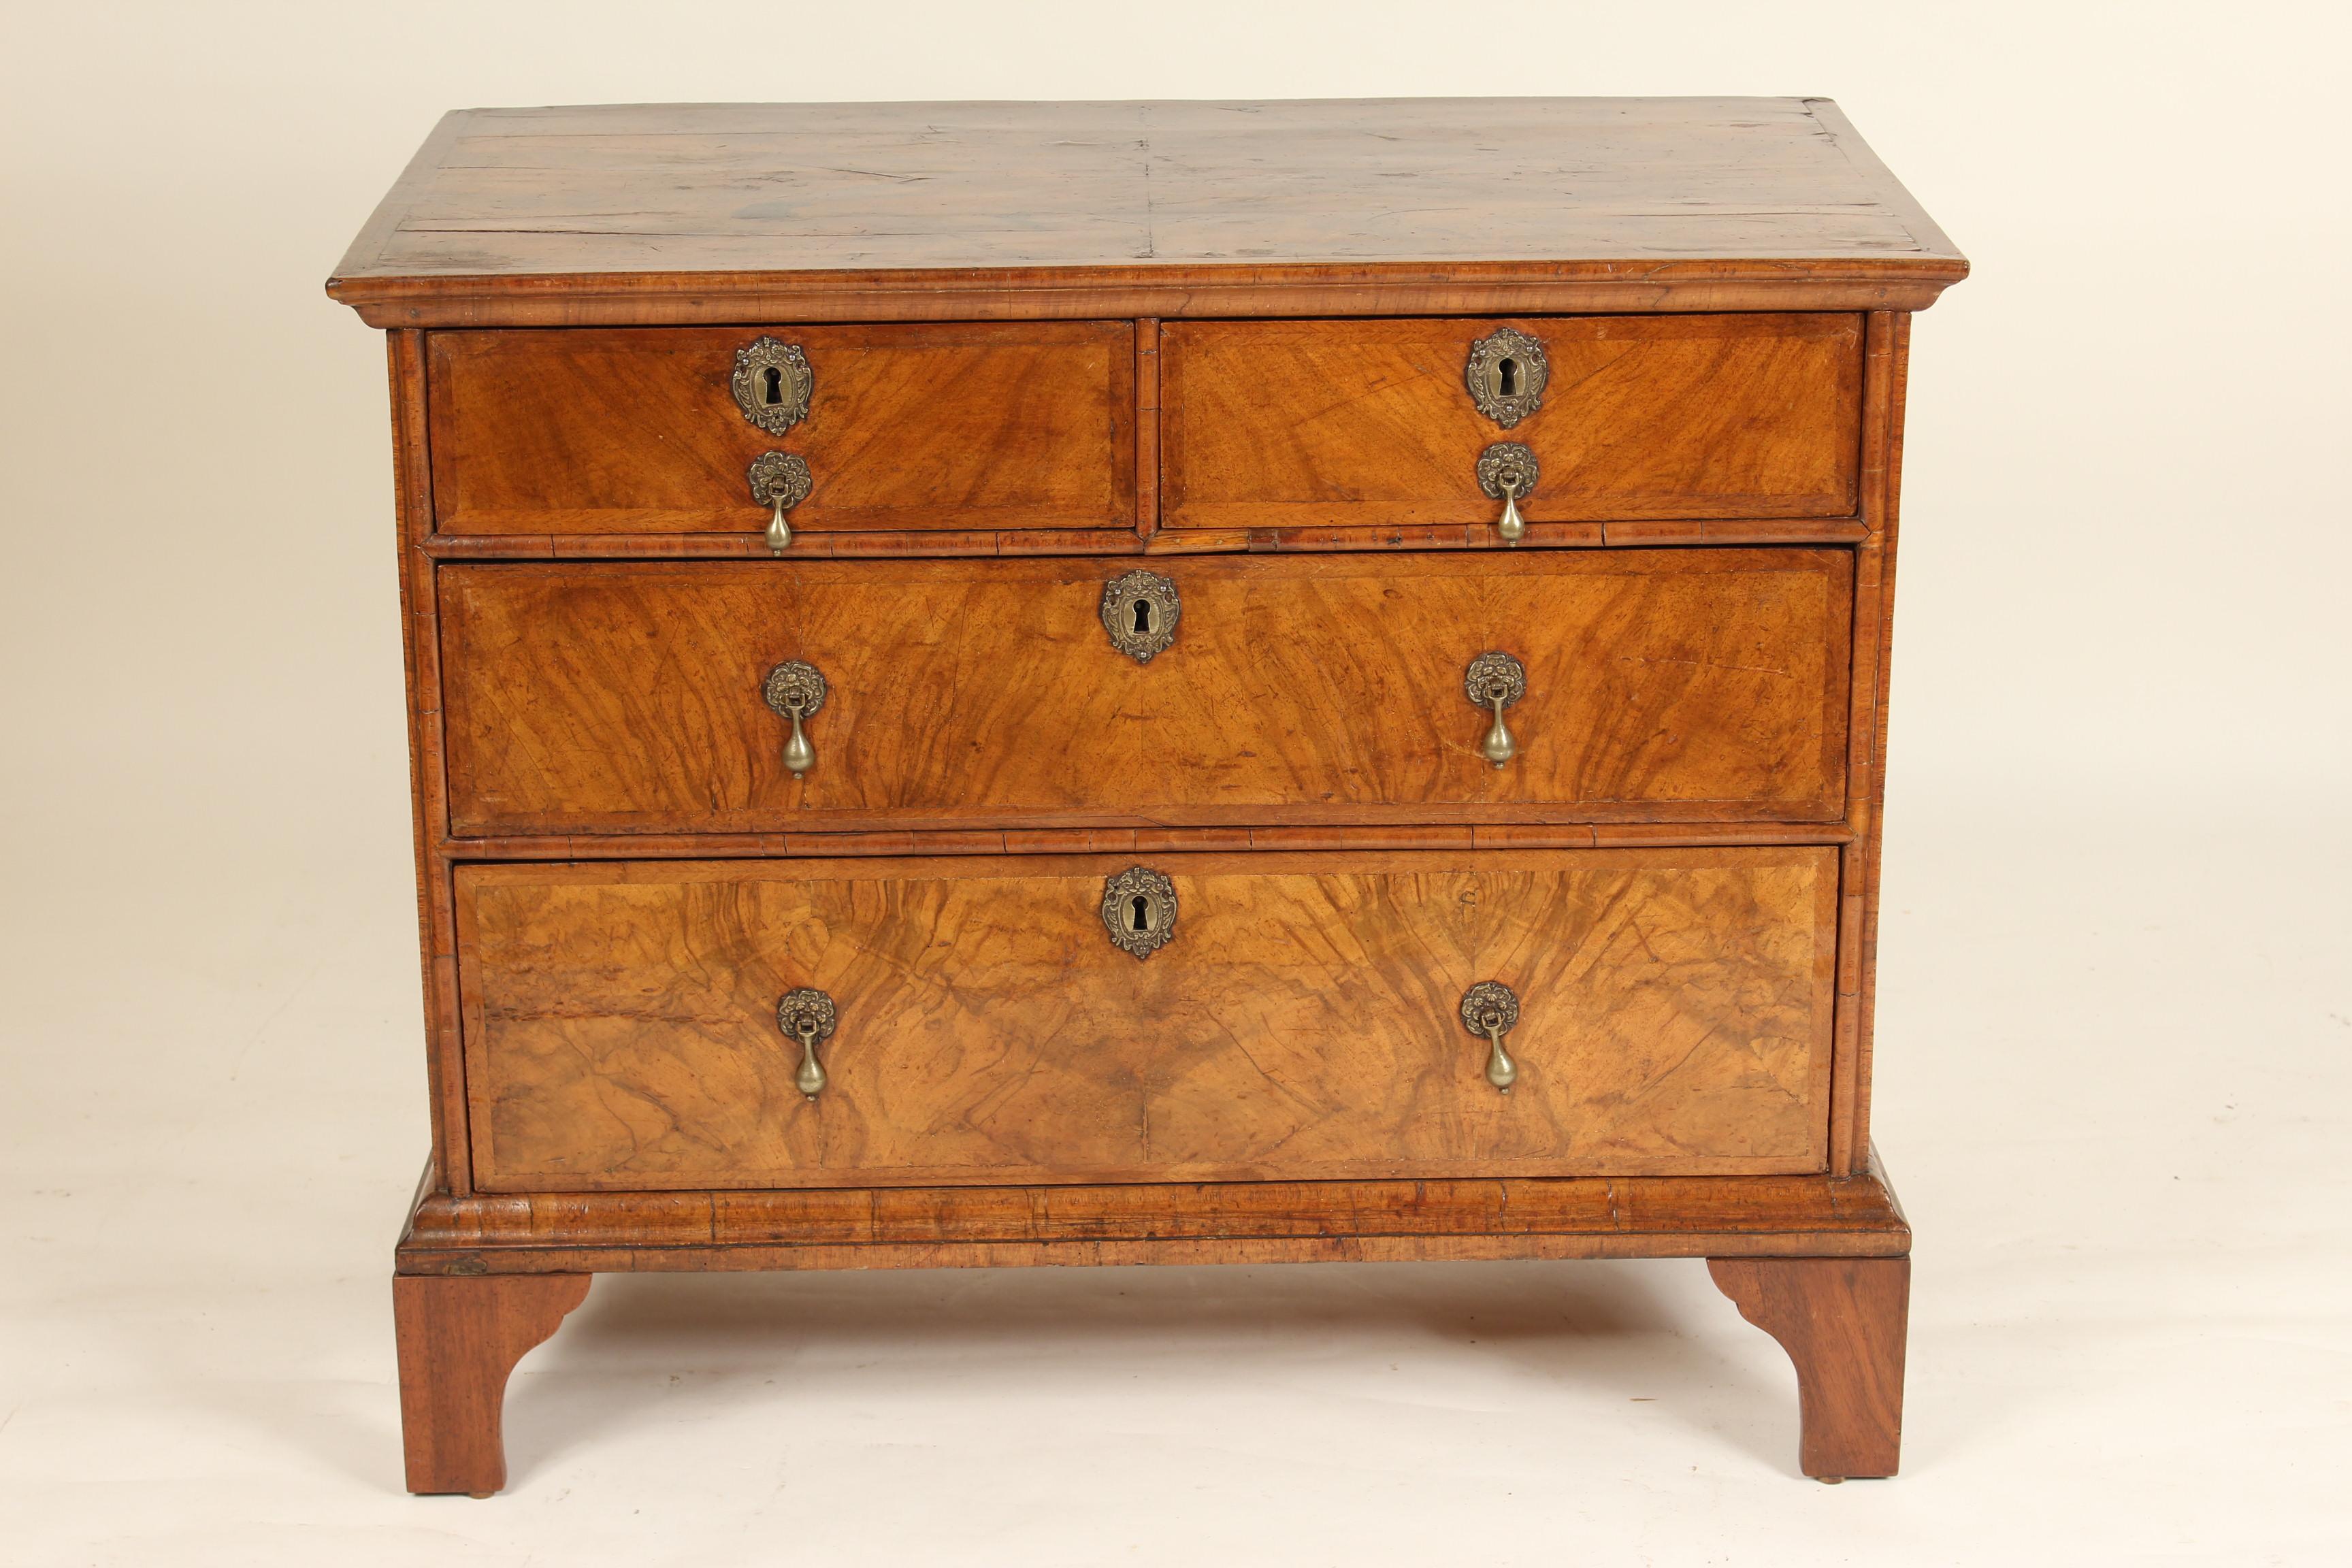 Antique George style I burl walnut chest of drawers, 18th century. The feet are 20th century.